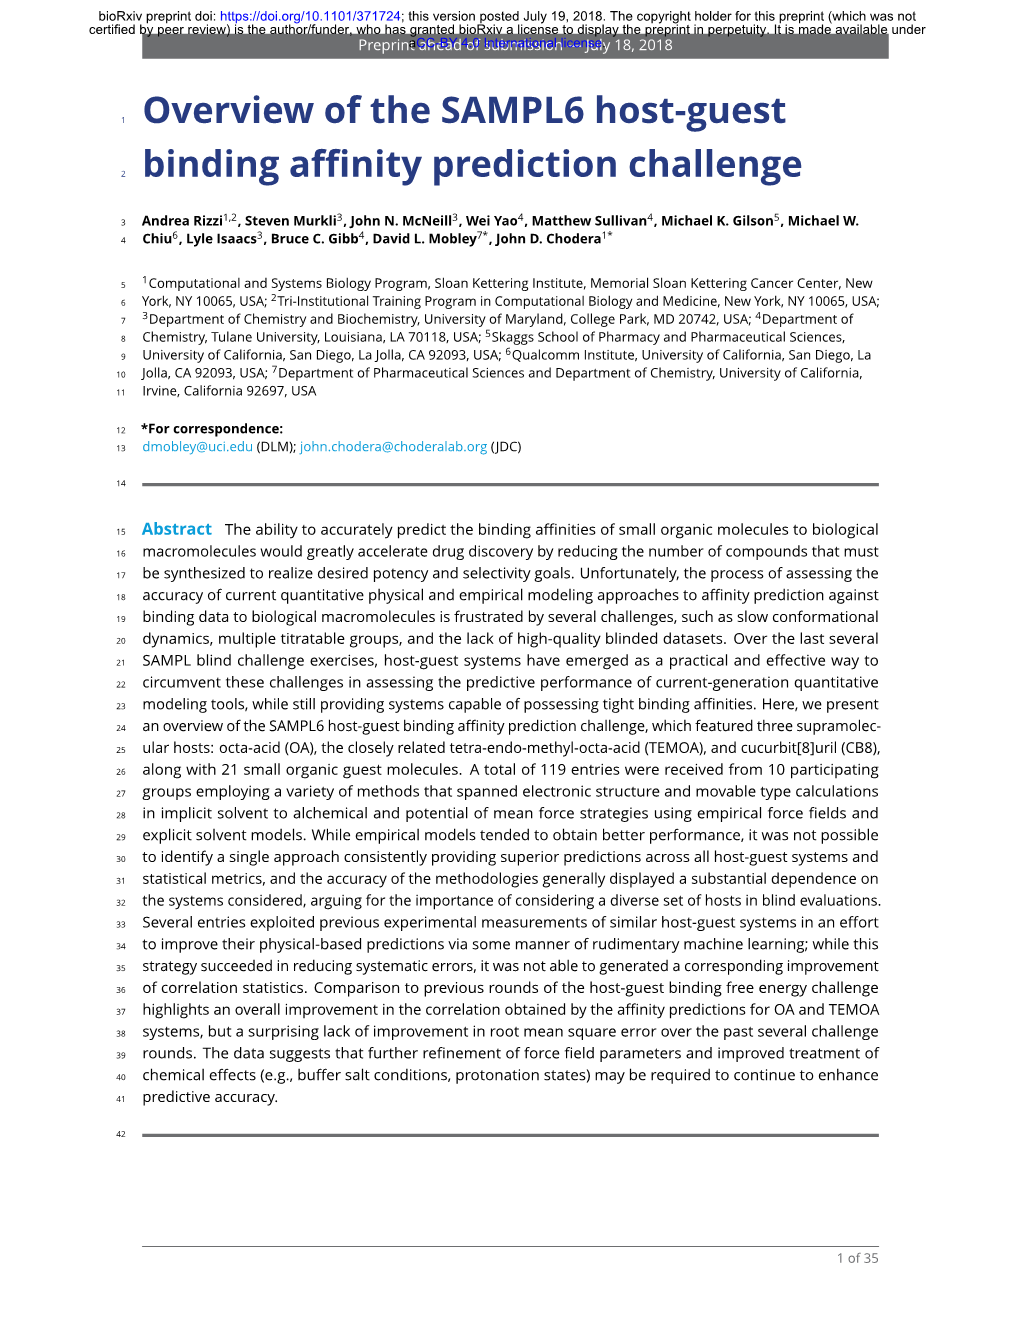 Overview of the SAMPL6 Host-Guest Binding Affinity Prediction